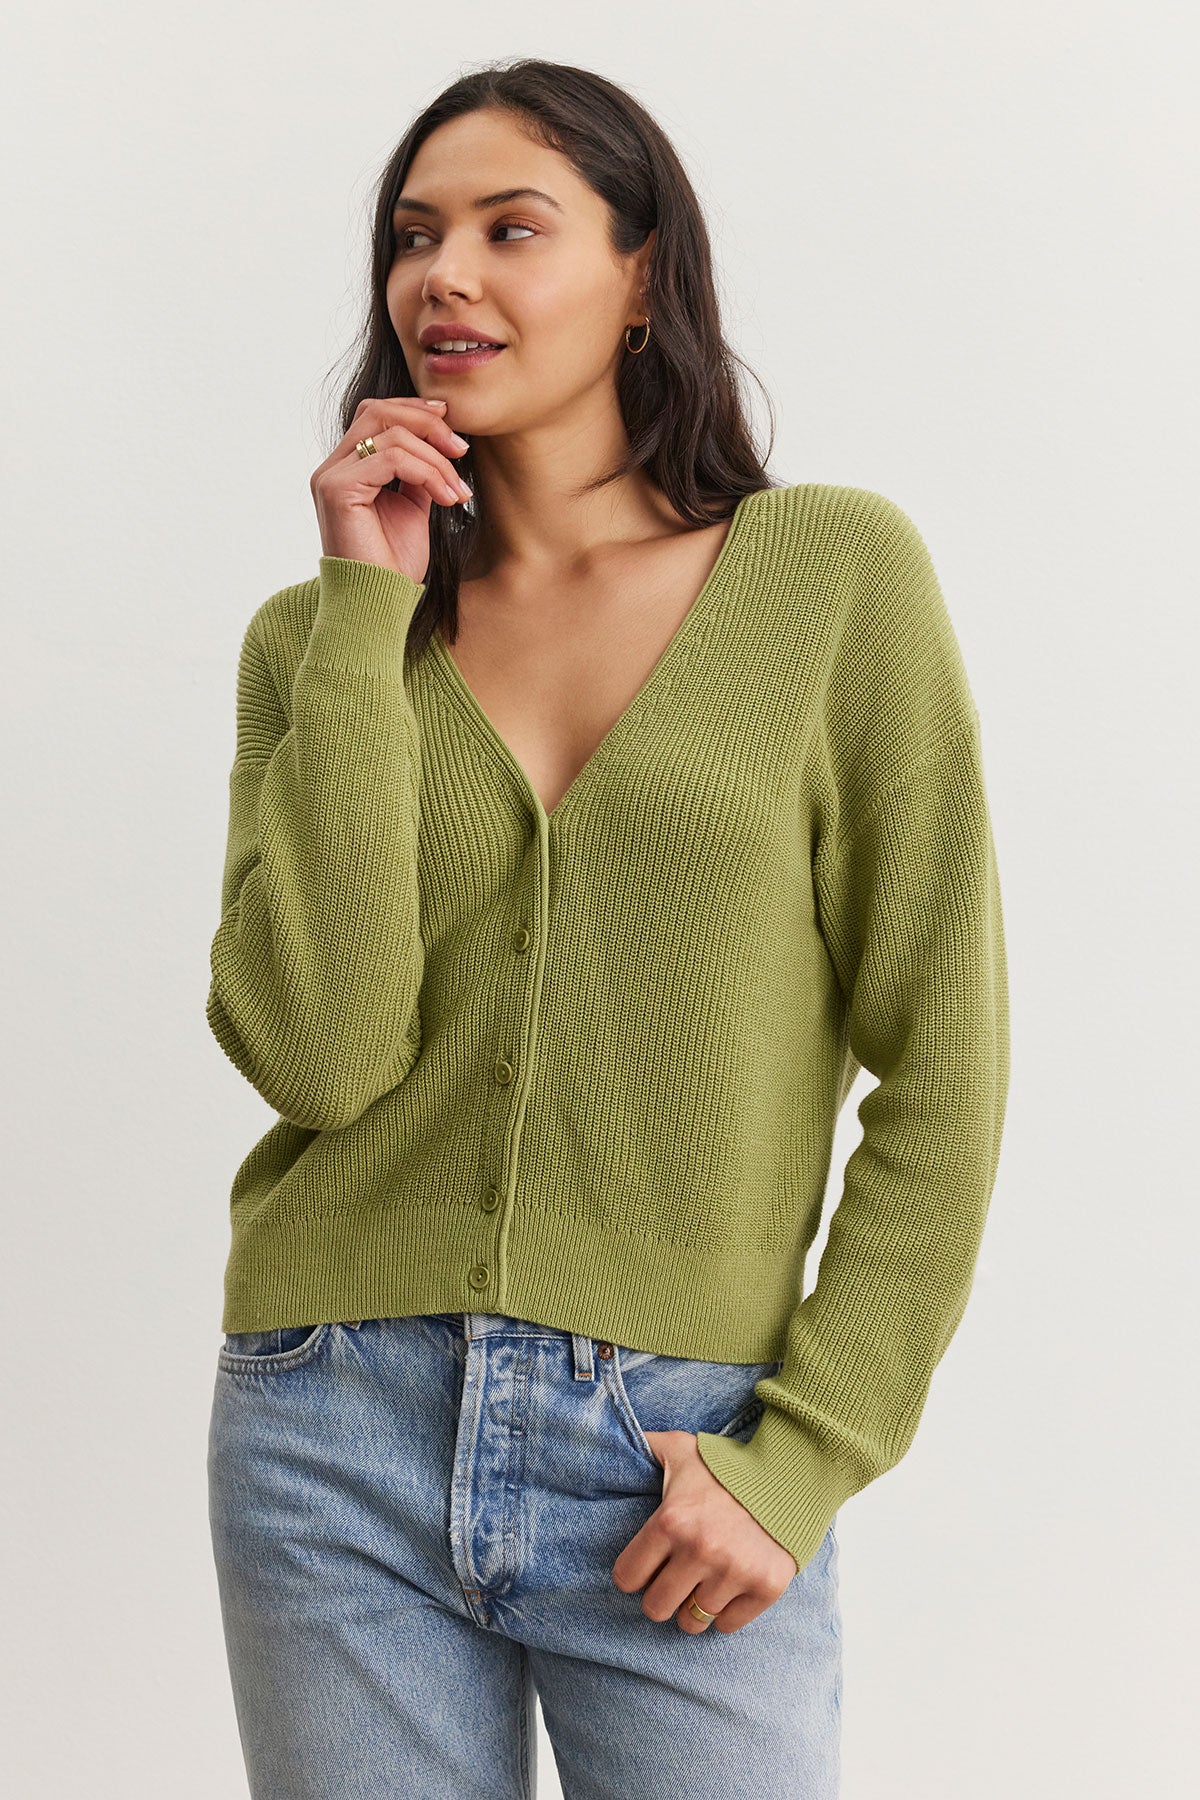 Woman in a green Velvet by Graham & Spencer Tava cardigan and blue jeans standing against a white background, touching her chin thoughtfully.-36998741688513